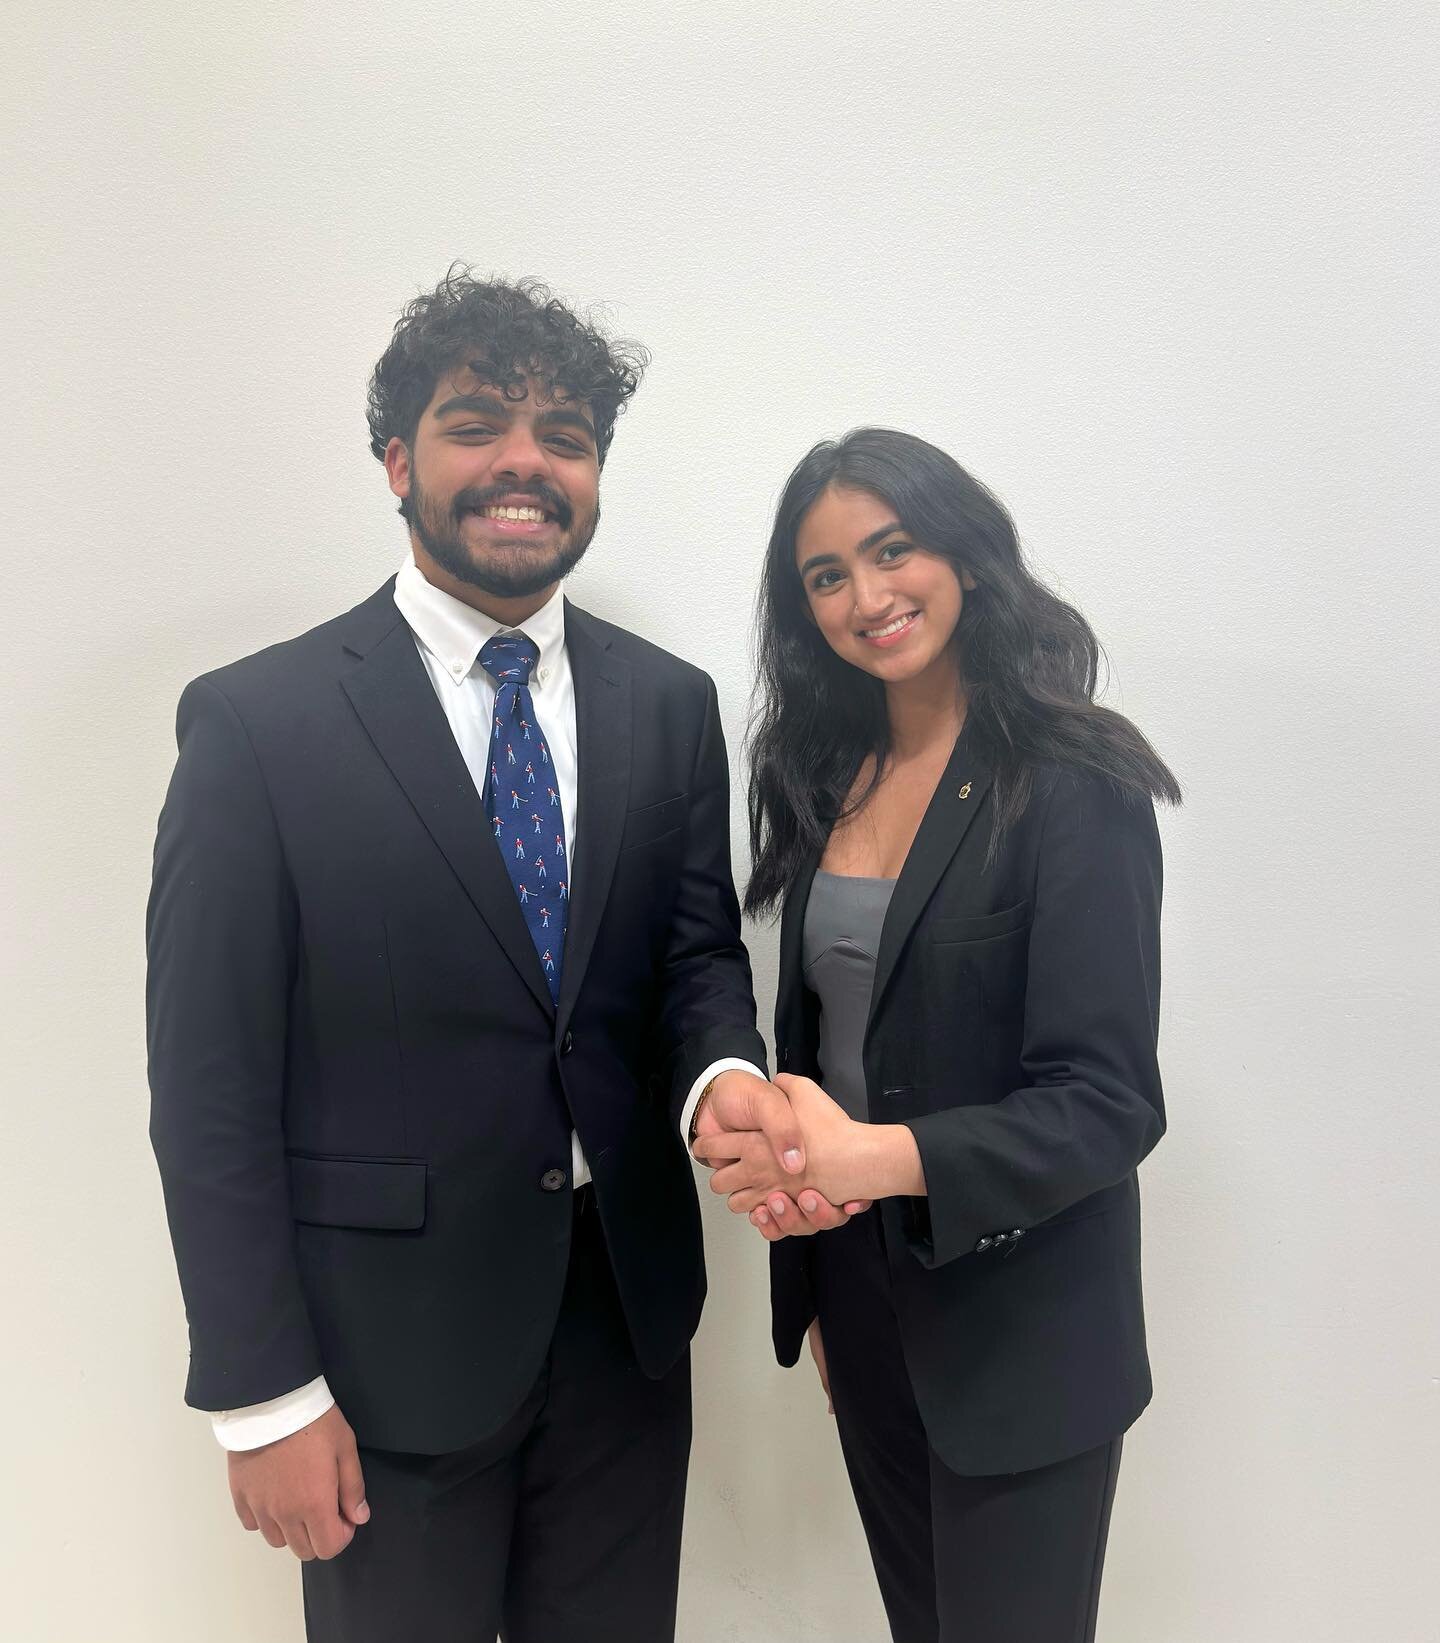 Introducing the Mu Rho Chapter&rsquo;s next president..

Hira Sarangapani!

Since joining the brotherhood, Brother Sarangapani&rsquo;s leadership has always been a strong quality of hers. She has excelled at her previous service as our Vice President